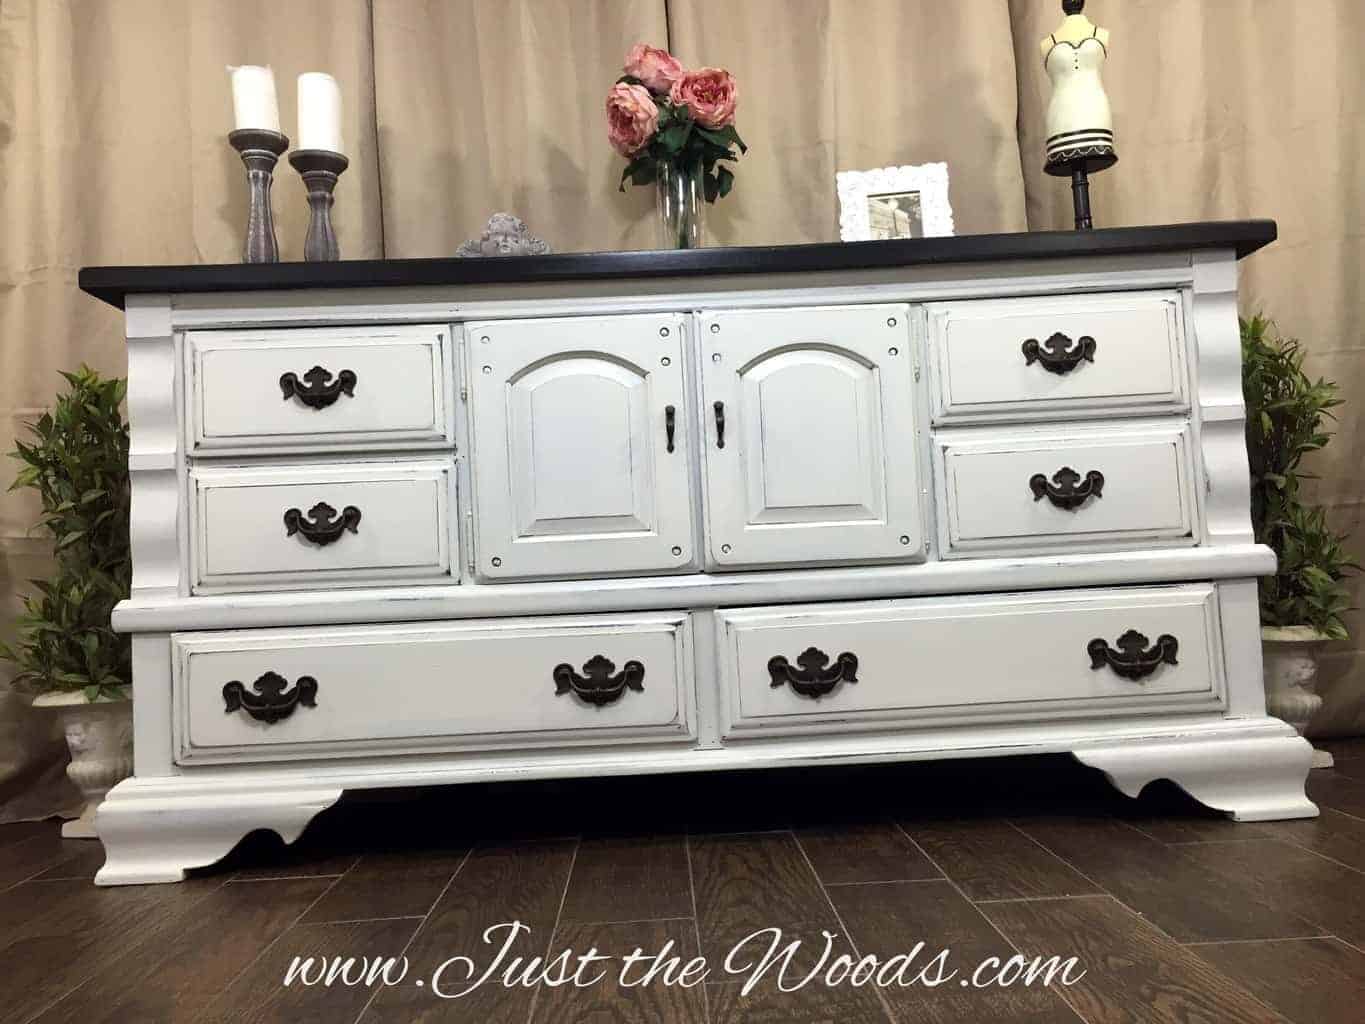 How To Paint A Distressed White Dresser, How To Paint A Vintage Dresser